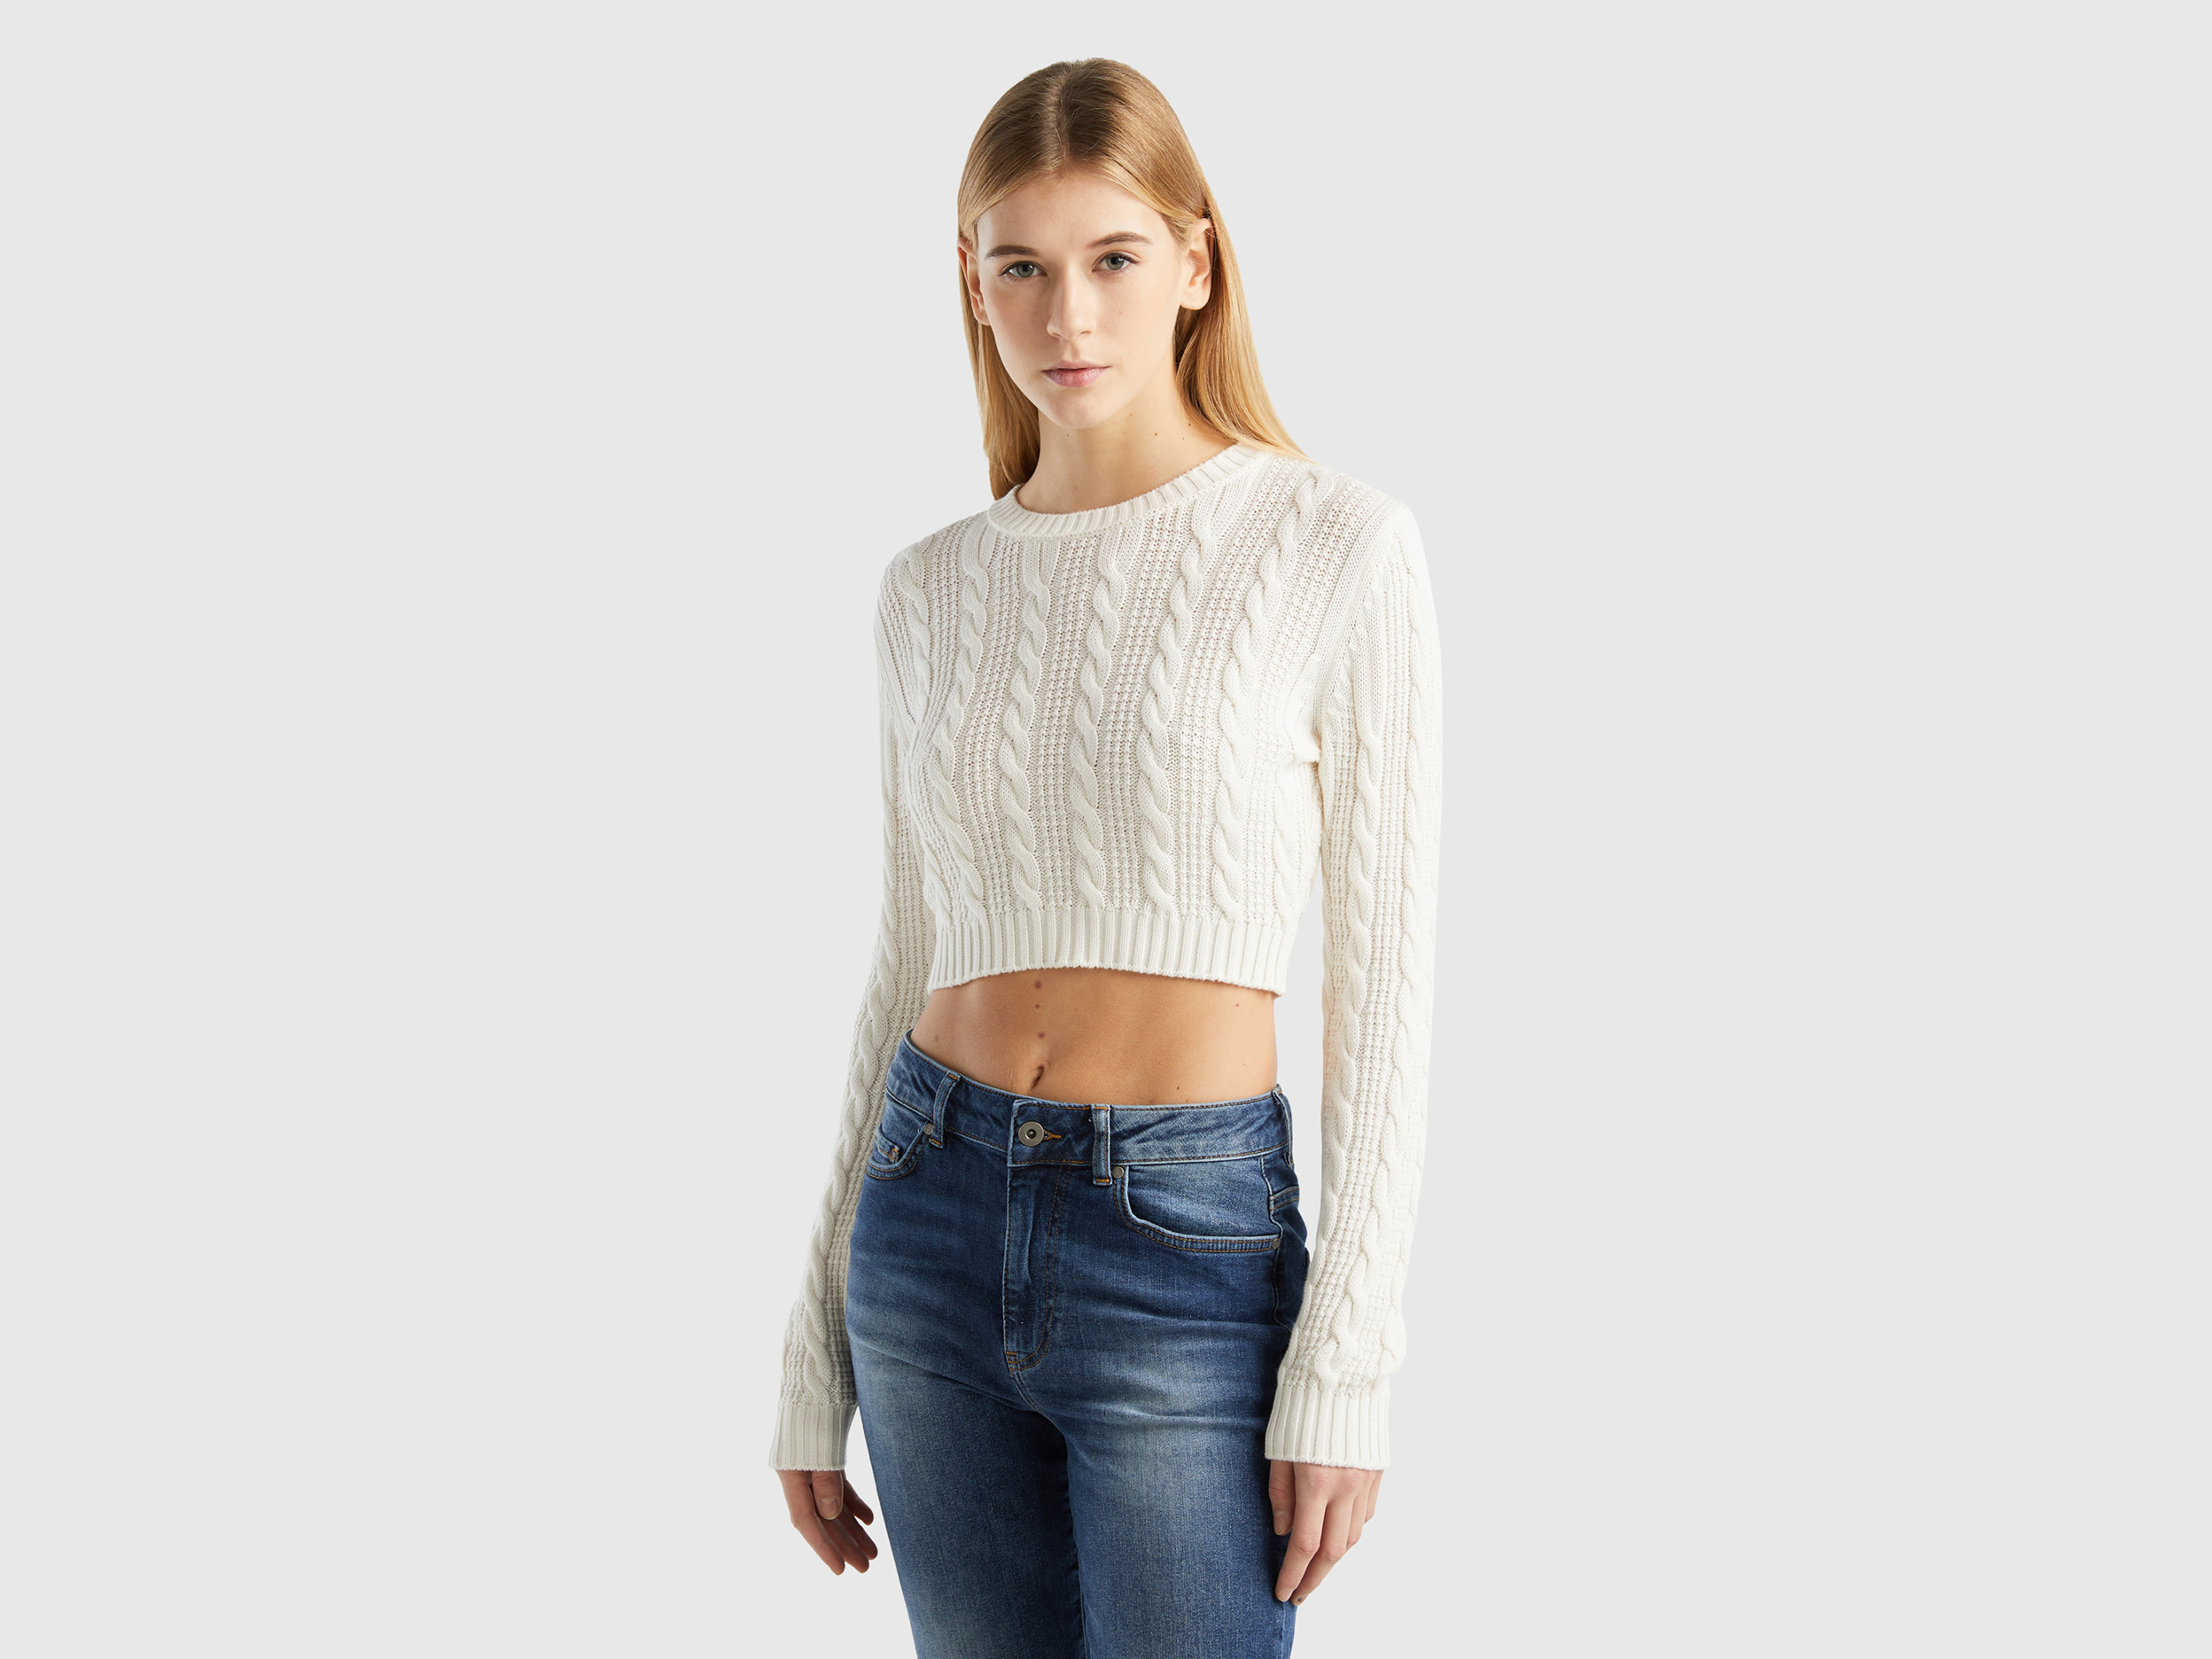 Benetton, Cropped Cable Knit Sweater, size L-XL, Creamy White, Women